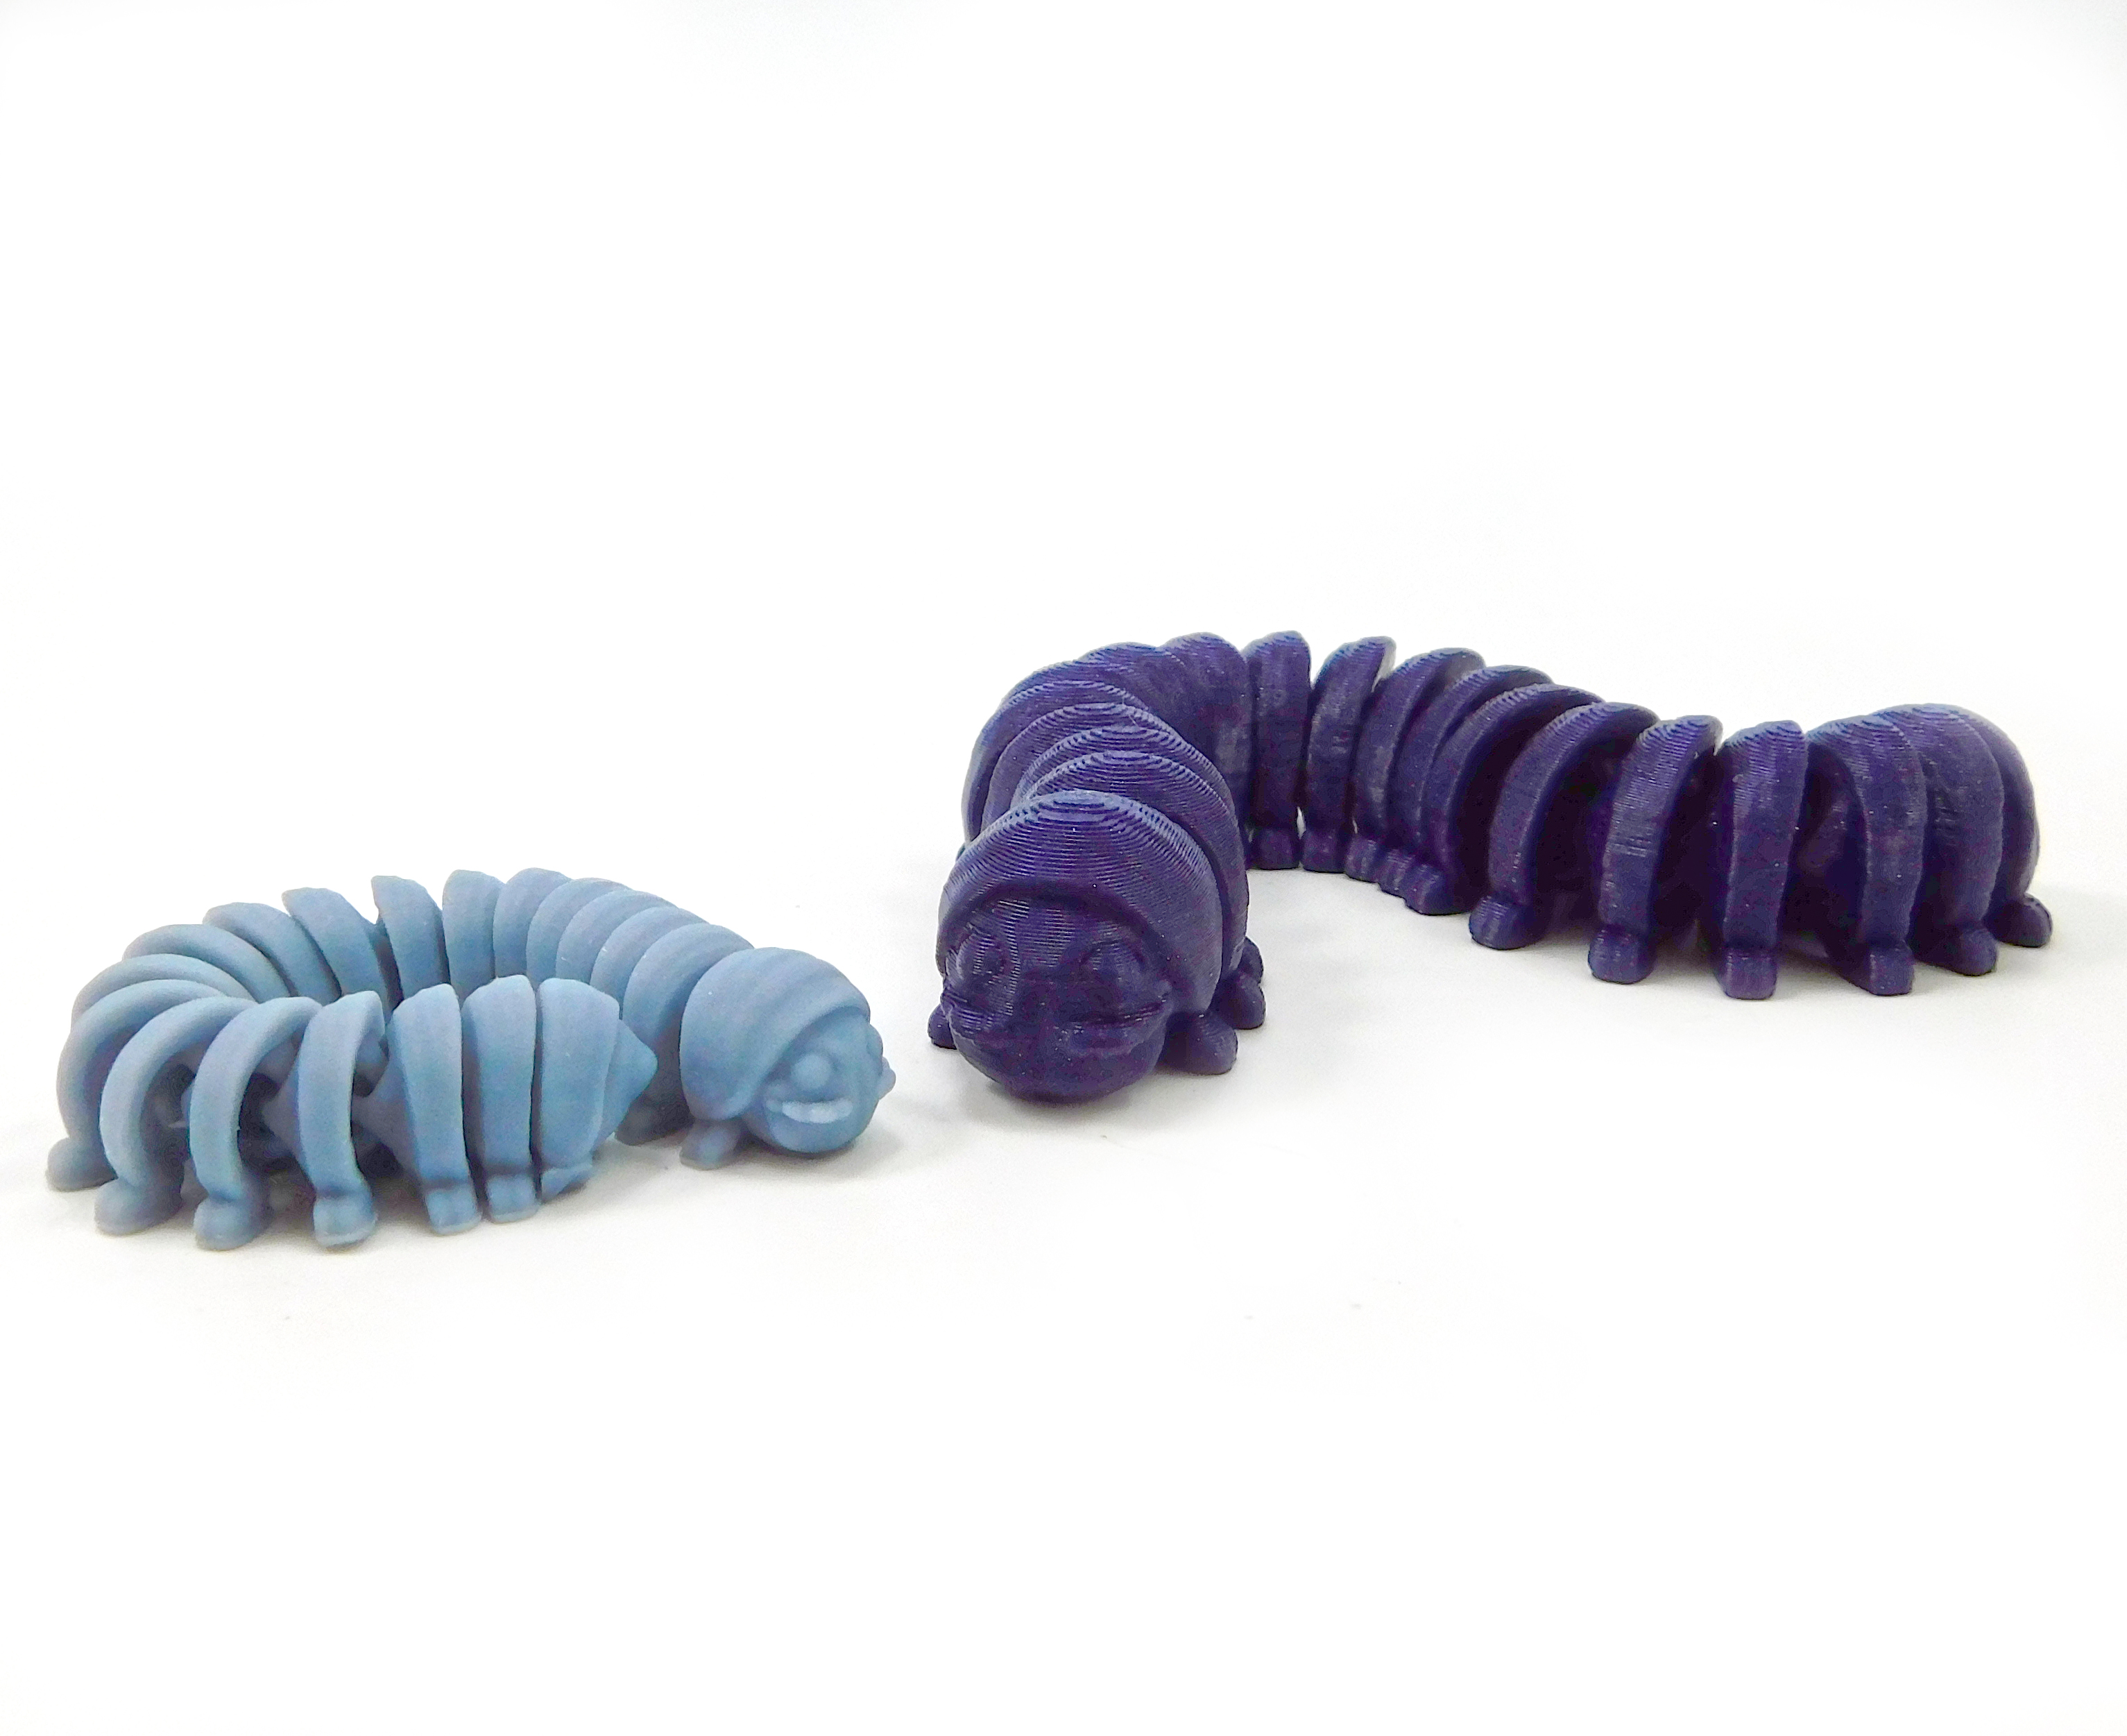 Milli: Print in place, support free,articulated millipede